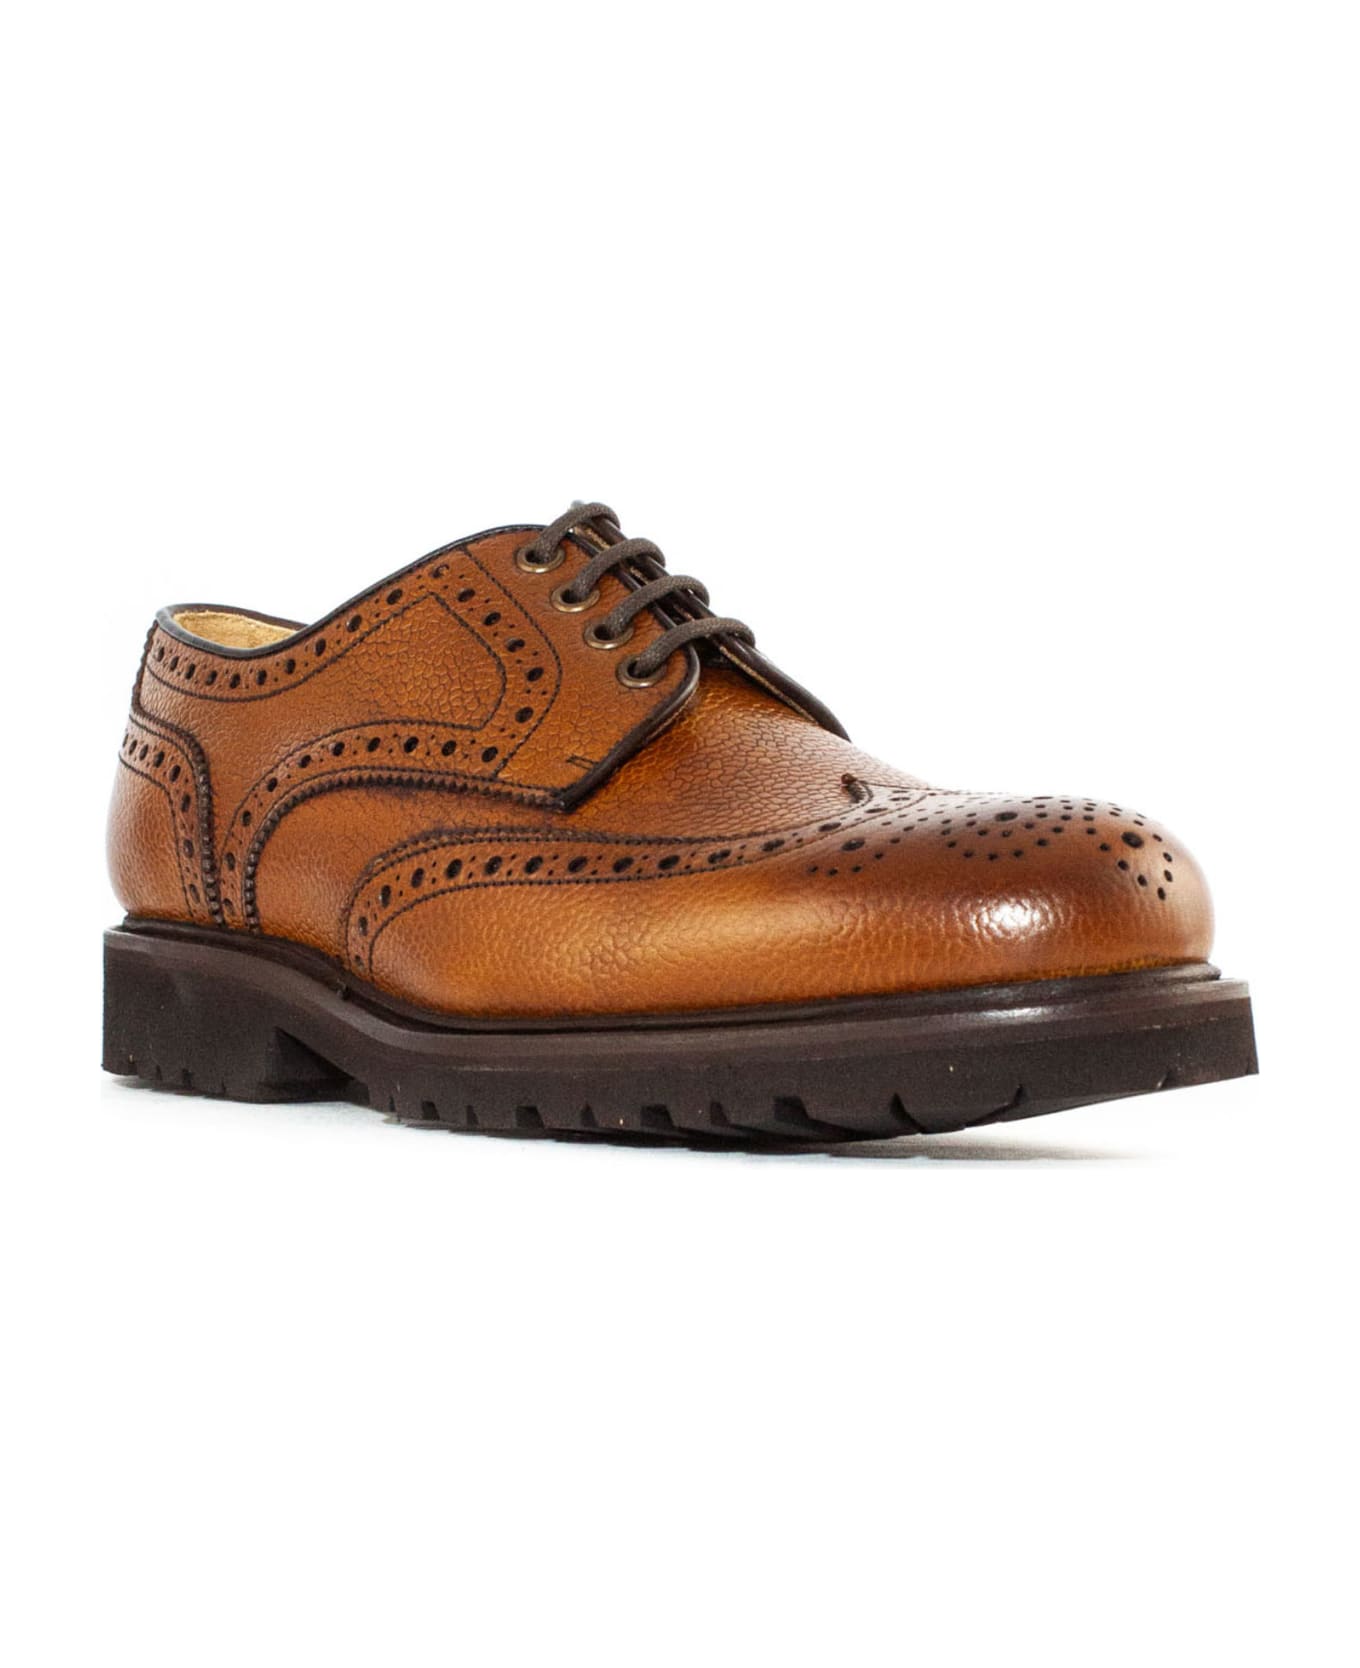 Berwick 1707 Brown Leather Derby Shoes - Marrone